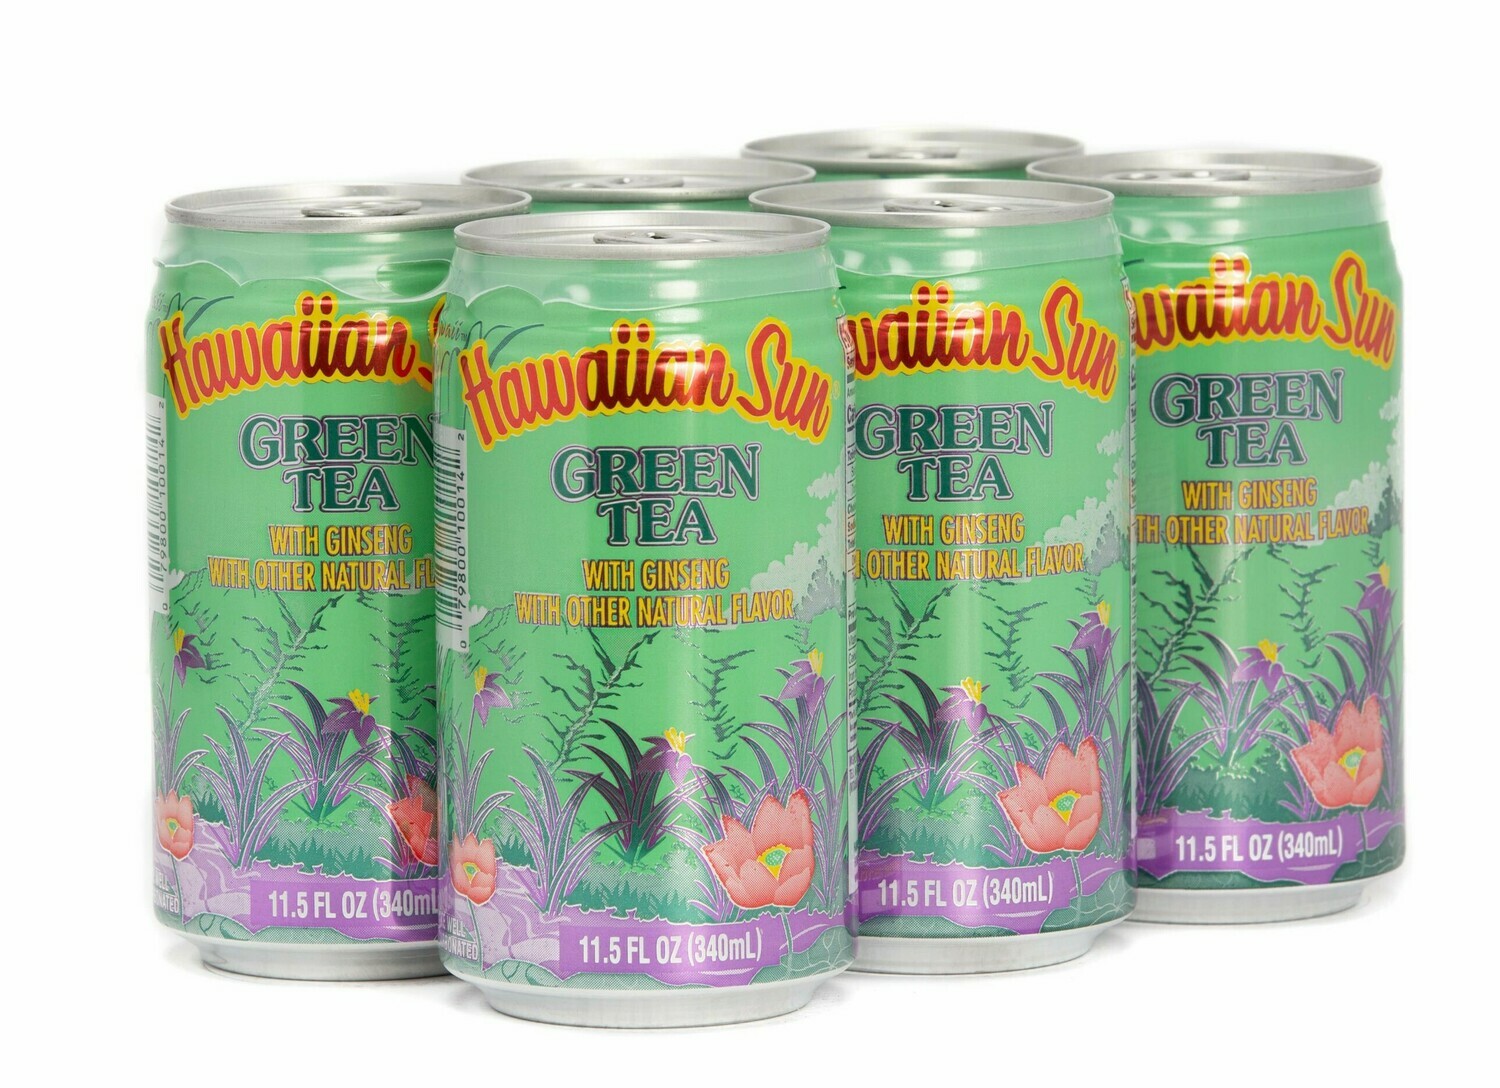 Hawaiian Sun Drink - Green Tea With Ginseng 11.5 oz (Pack of 6) **Limit 8 - 6/pks total per purchase transaction**